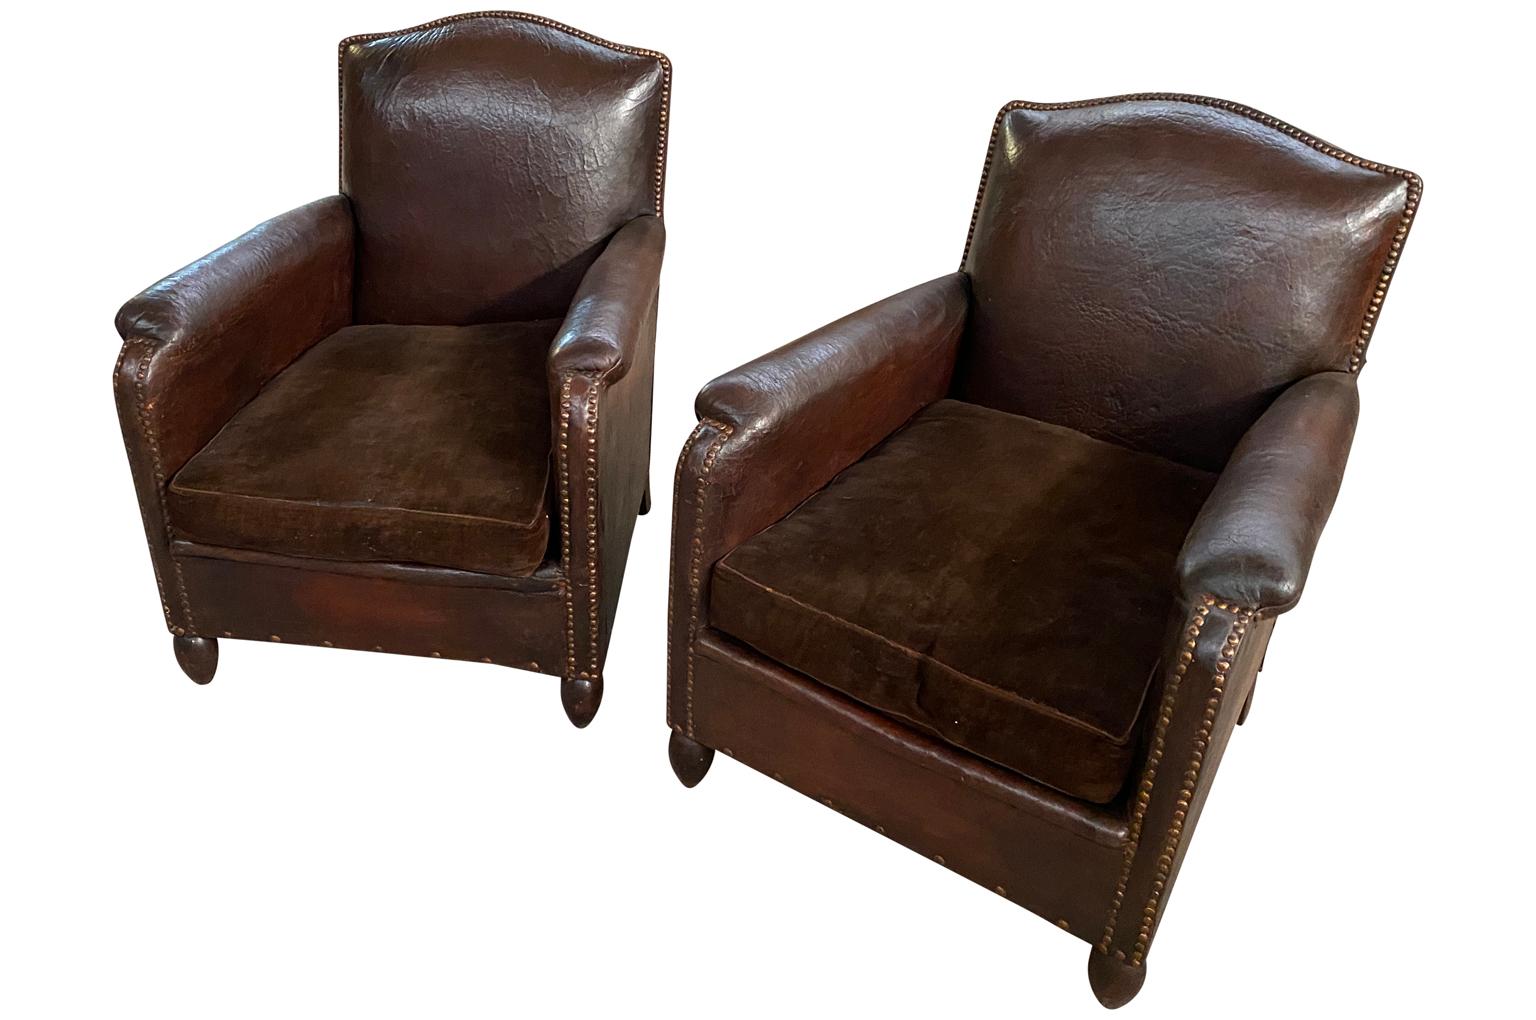 20th Century Pair of French Arte Deco Period Club Chairs